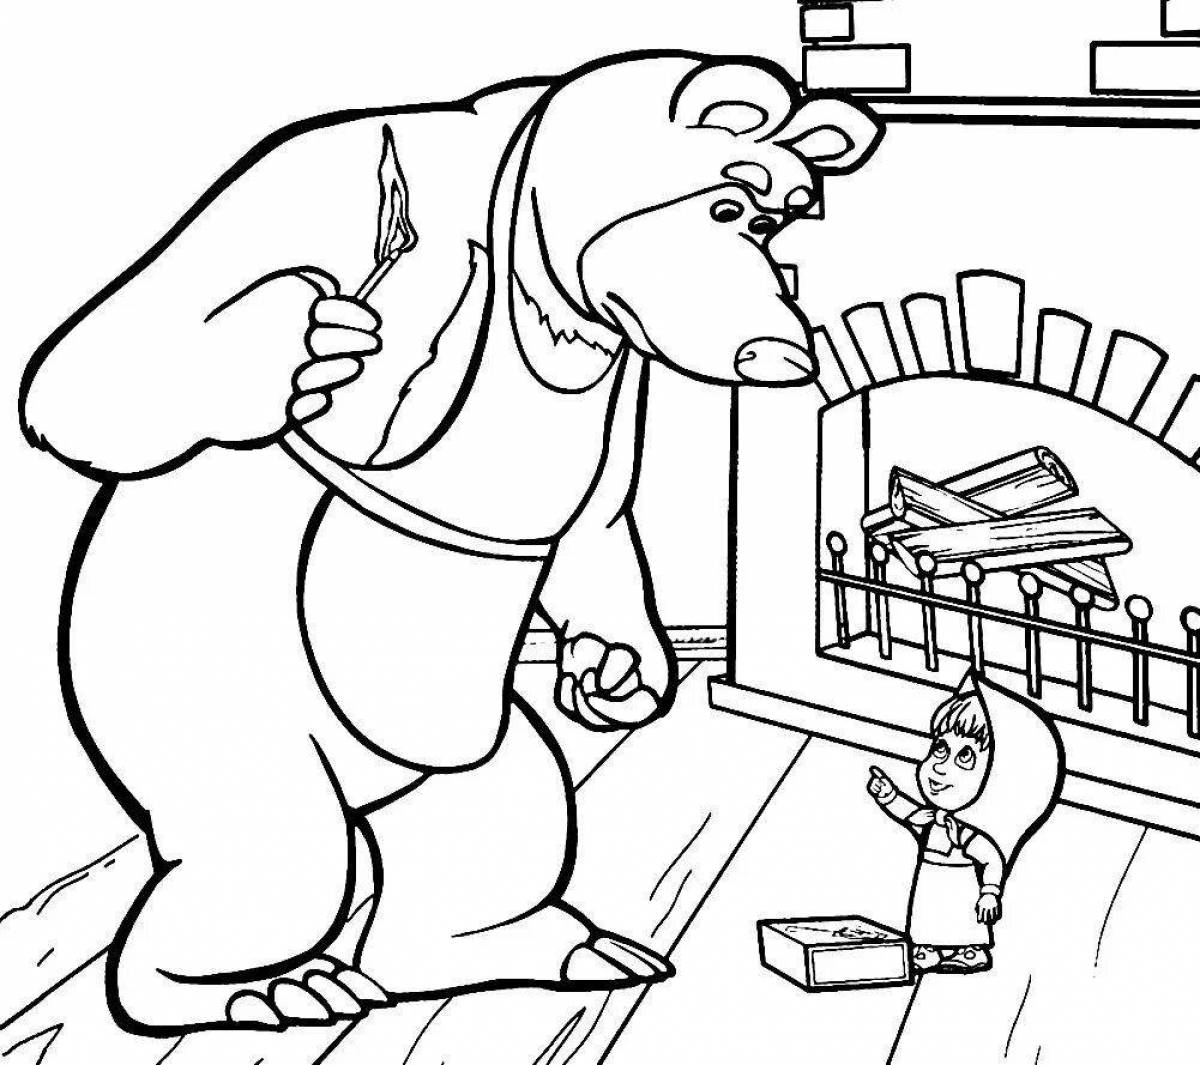 Outstanding coloring pages for kids